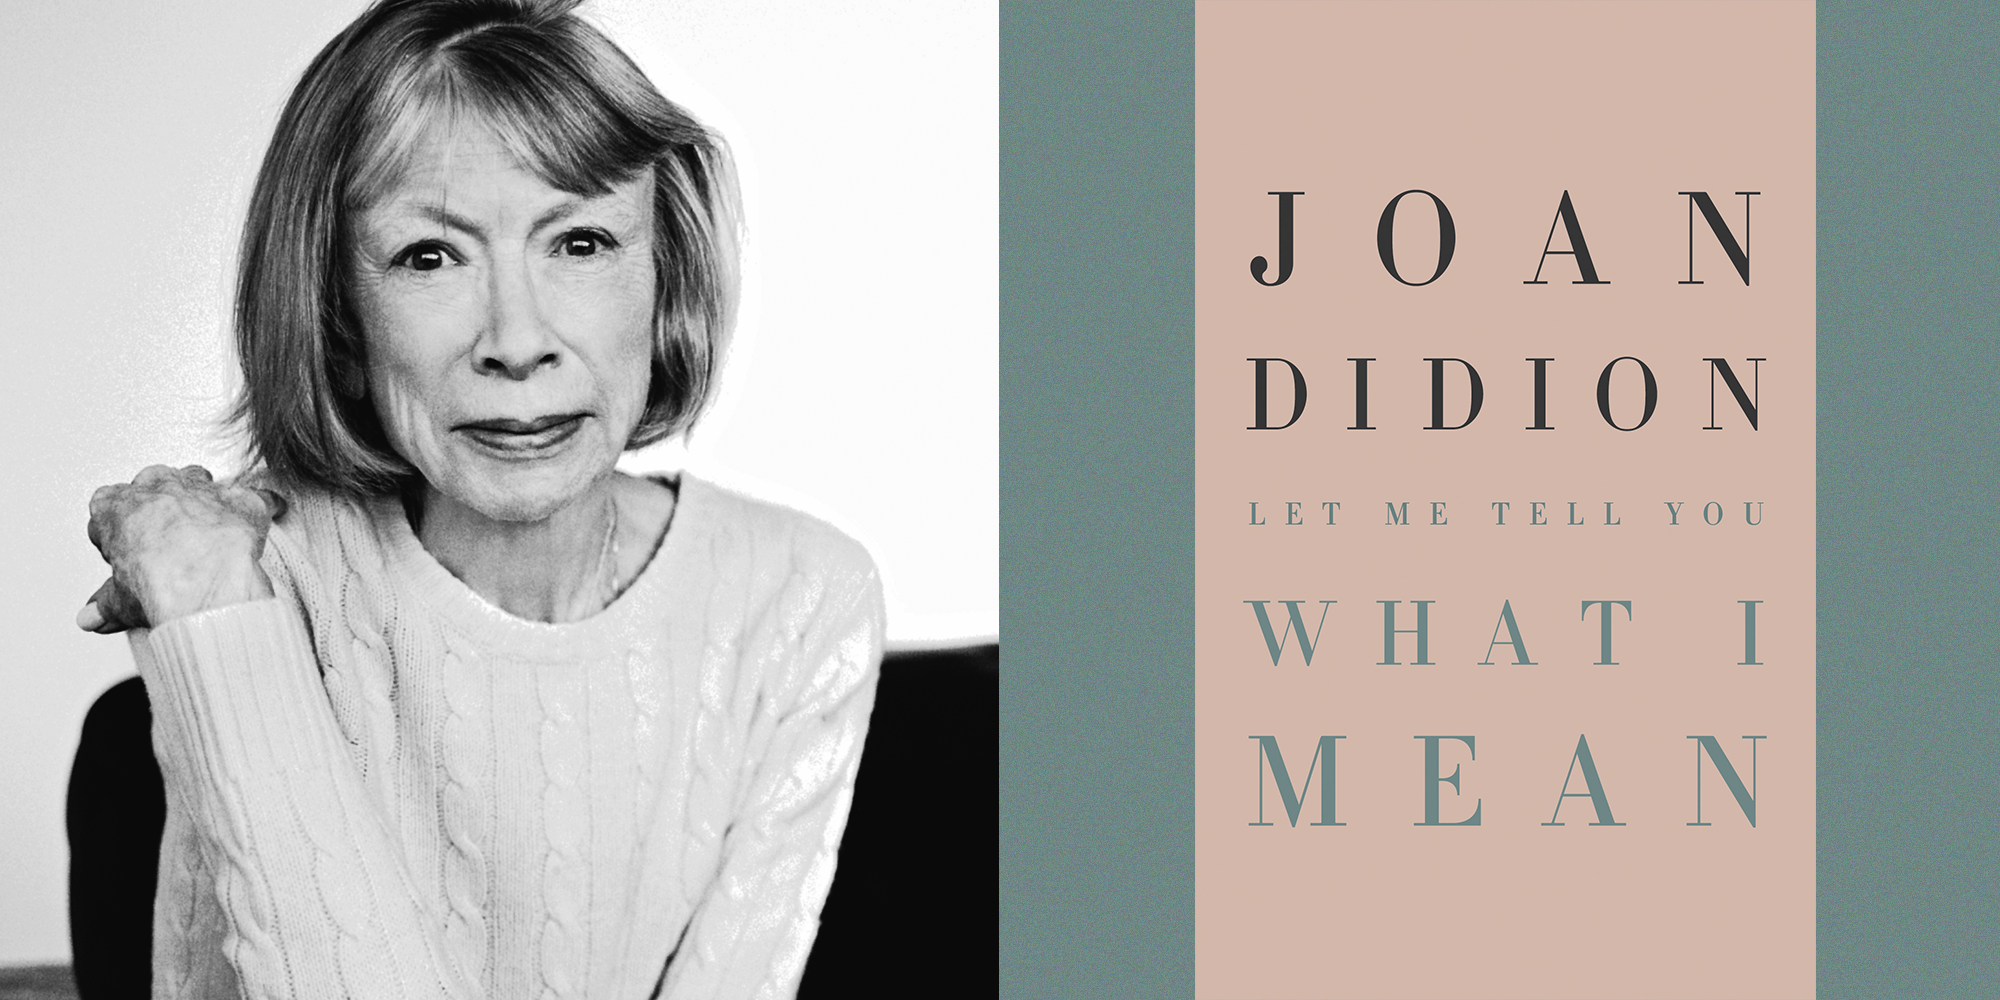 Must　Read:　You　Let　Joan　What　Me　Tell　a　I　Didion　Mean　by　is　Review